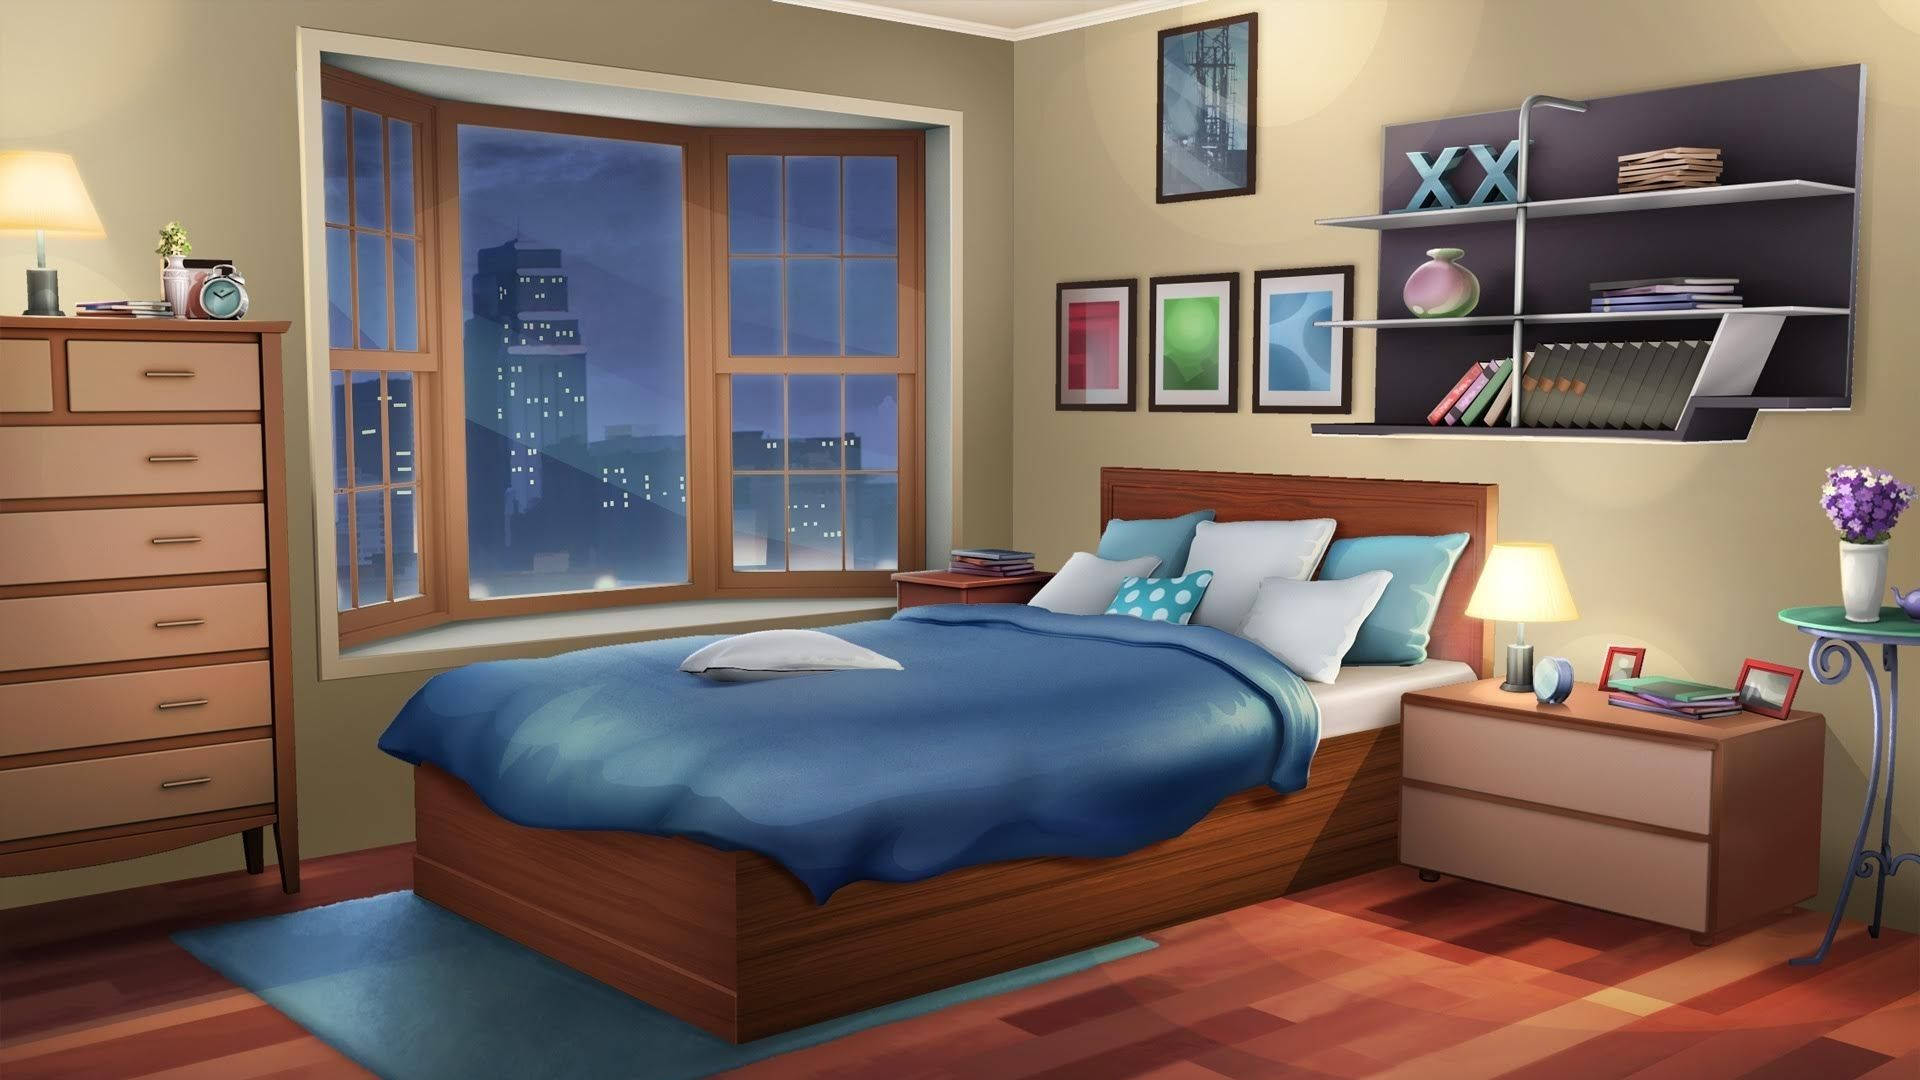 Download Anime Room At Night Wallpaper 